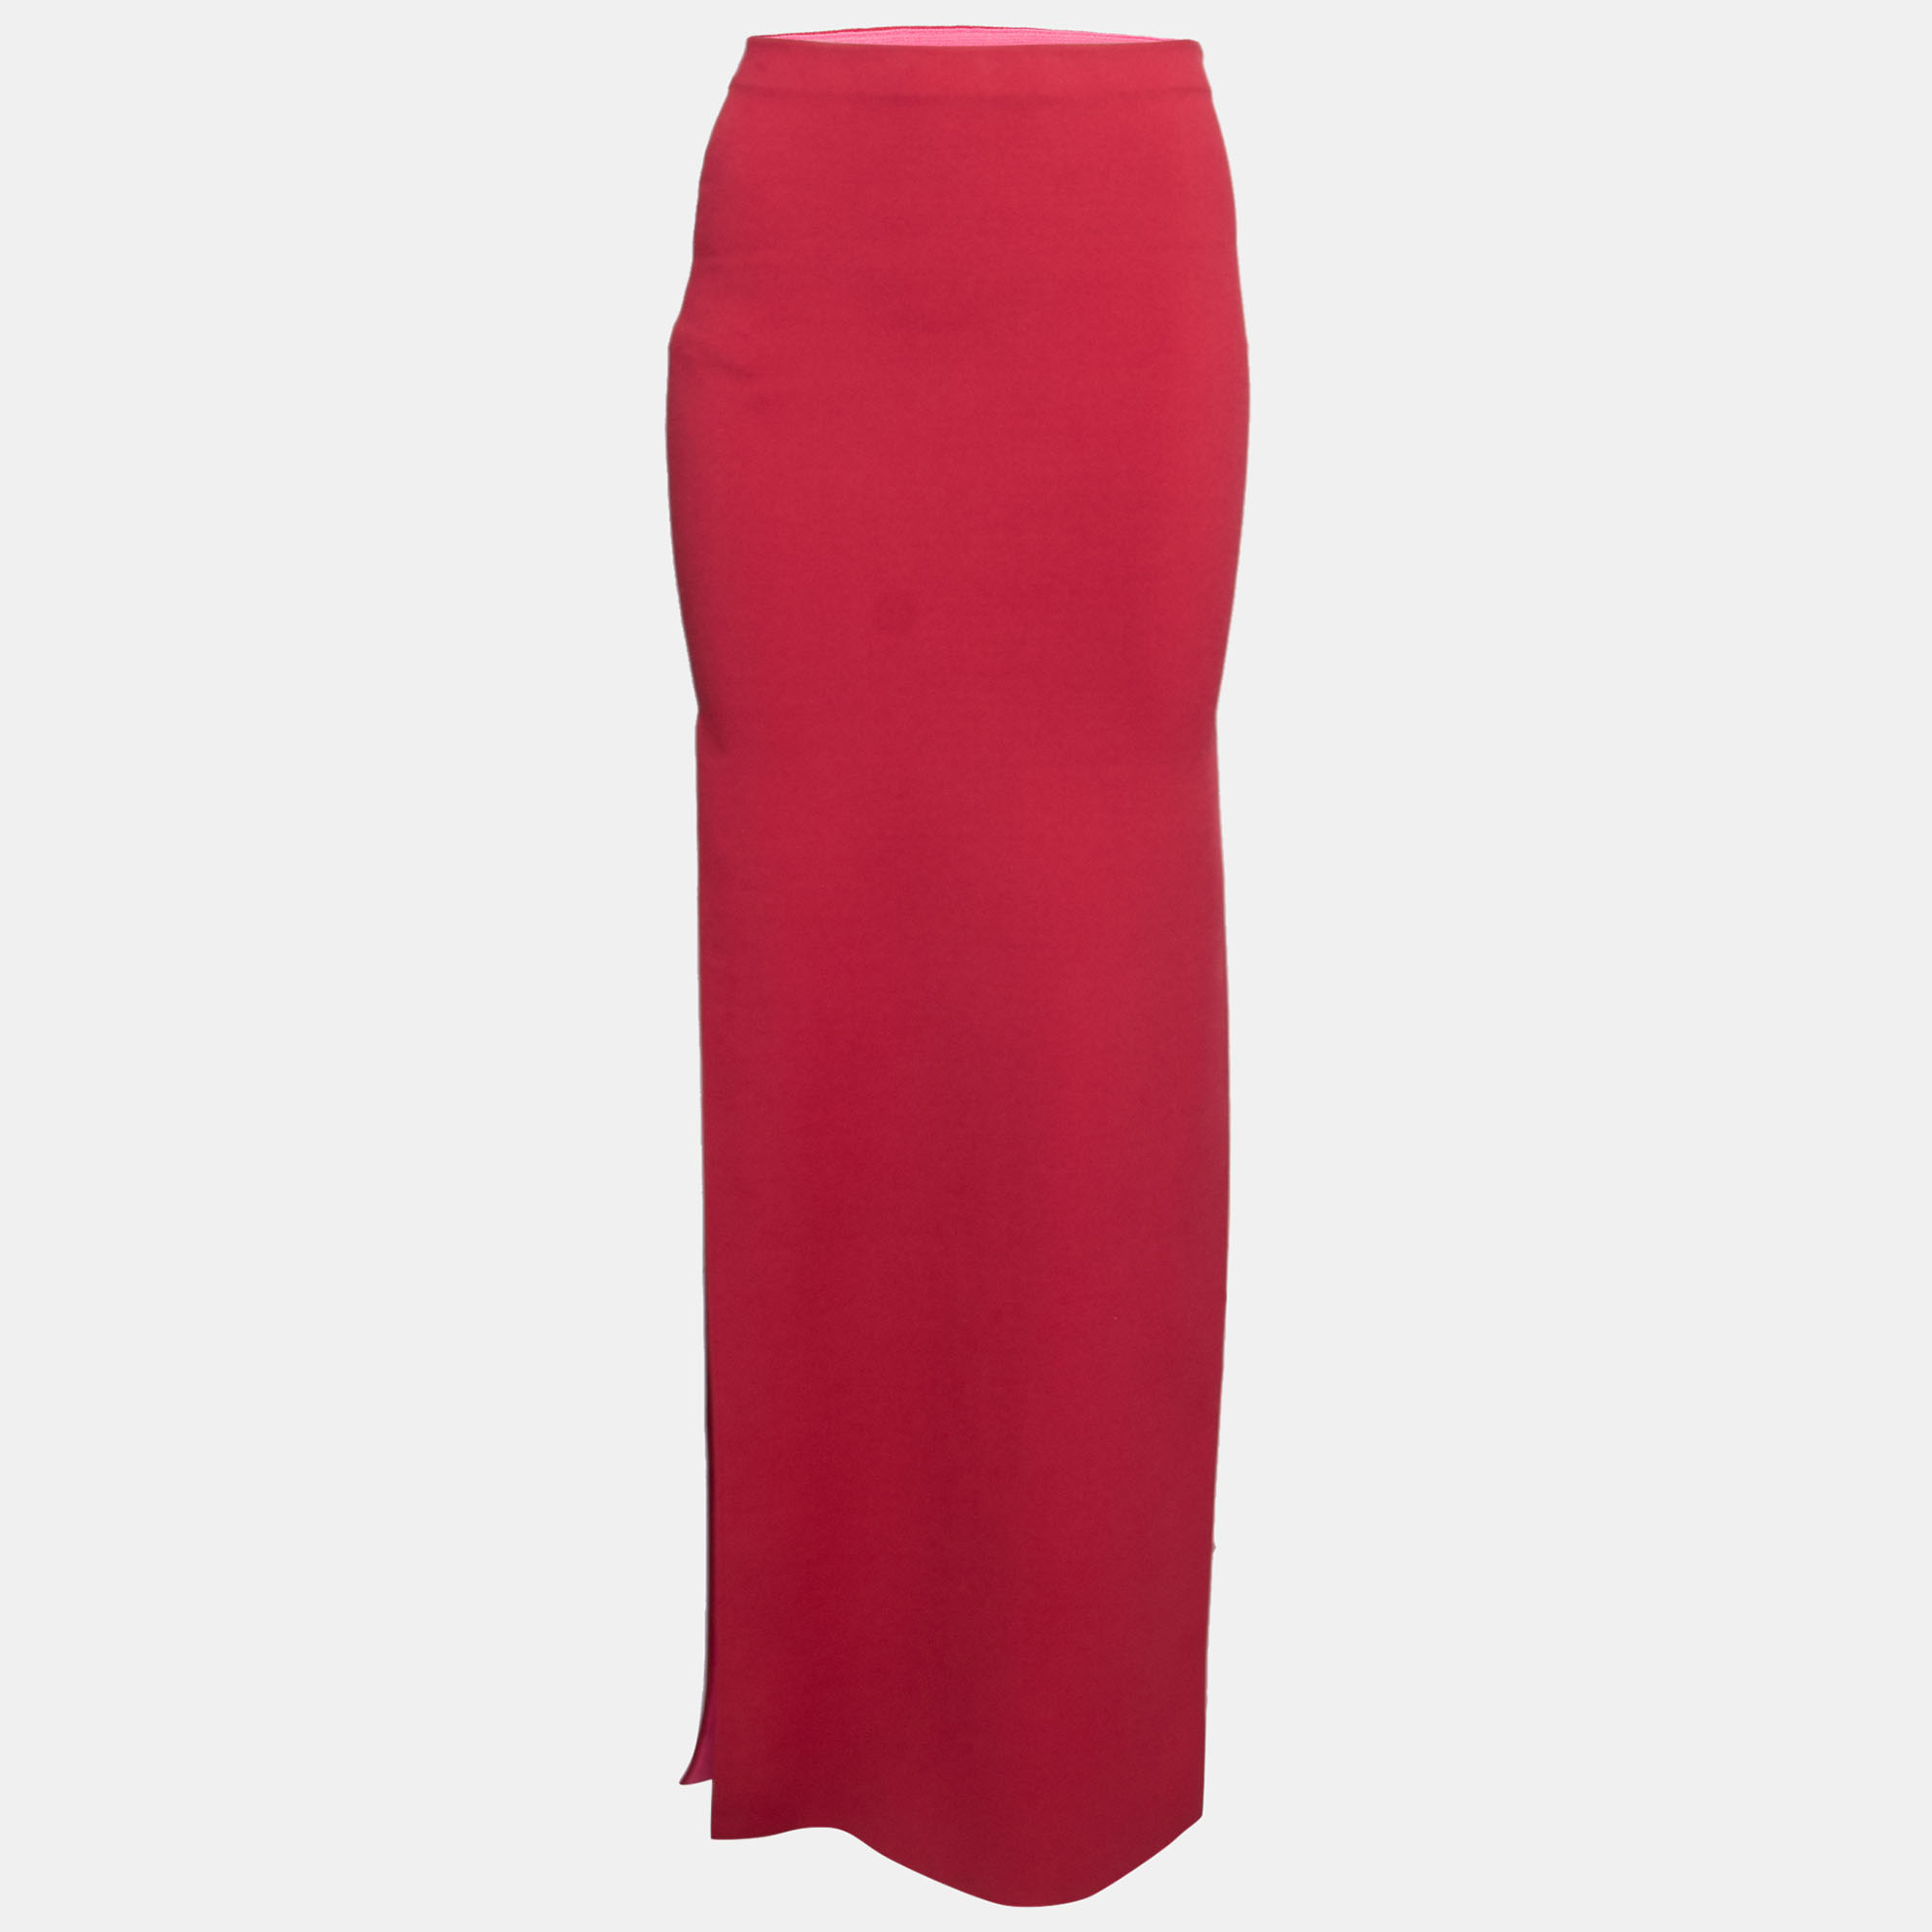 Herve Leger Red Stretch Knit Maxi Skirt XS